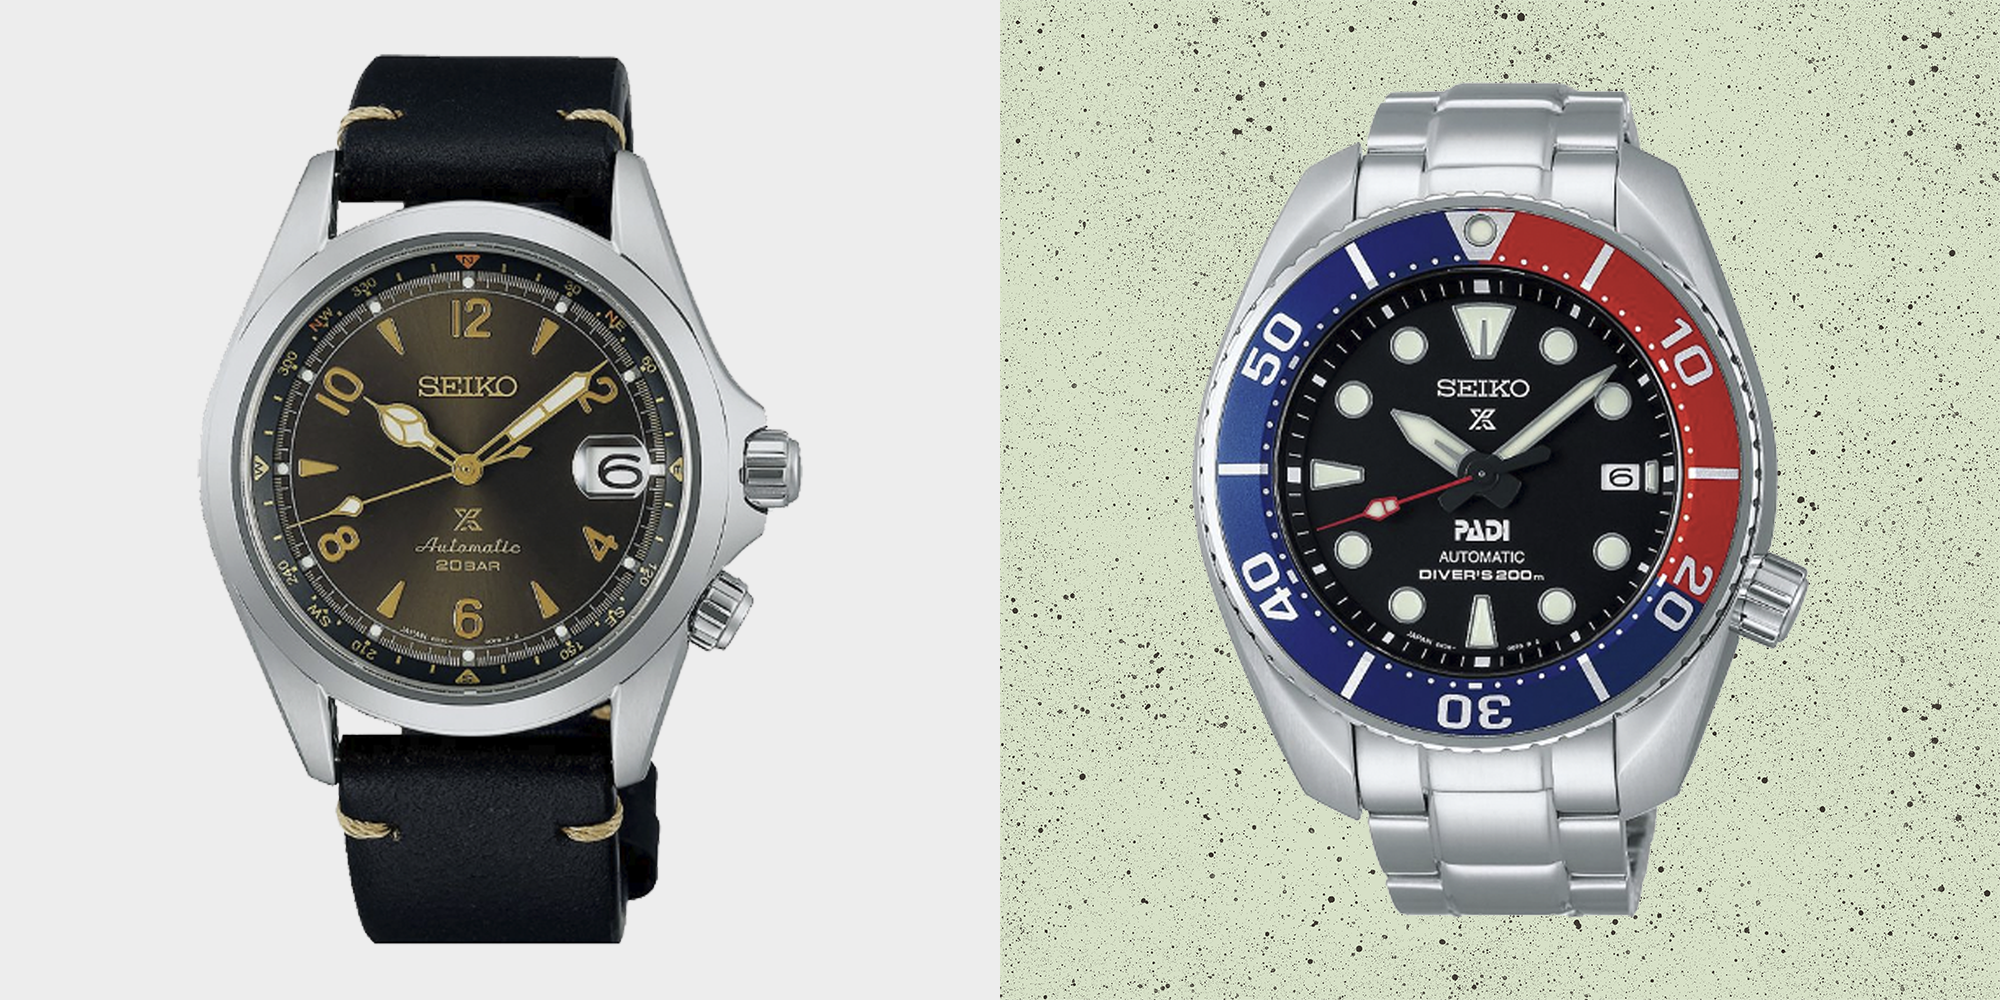 The Seiko 5 Sports is your perfect first proper watch | British GQ